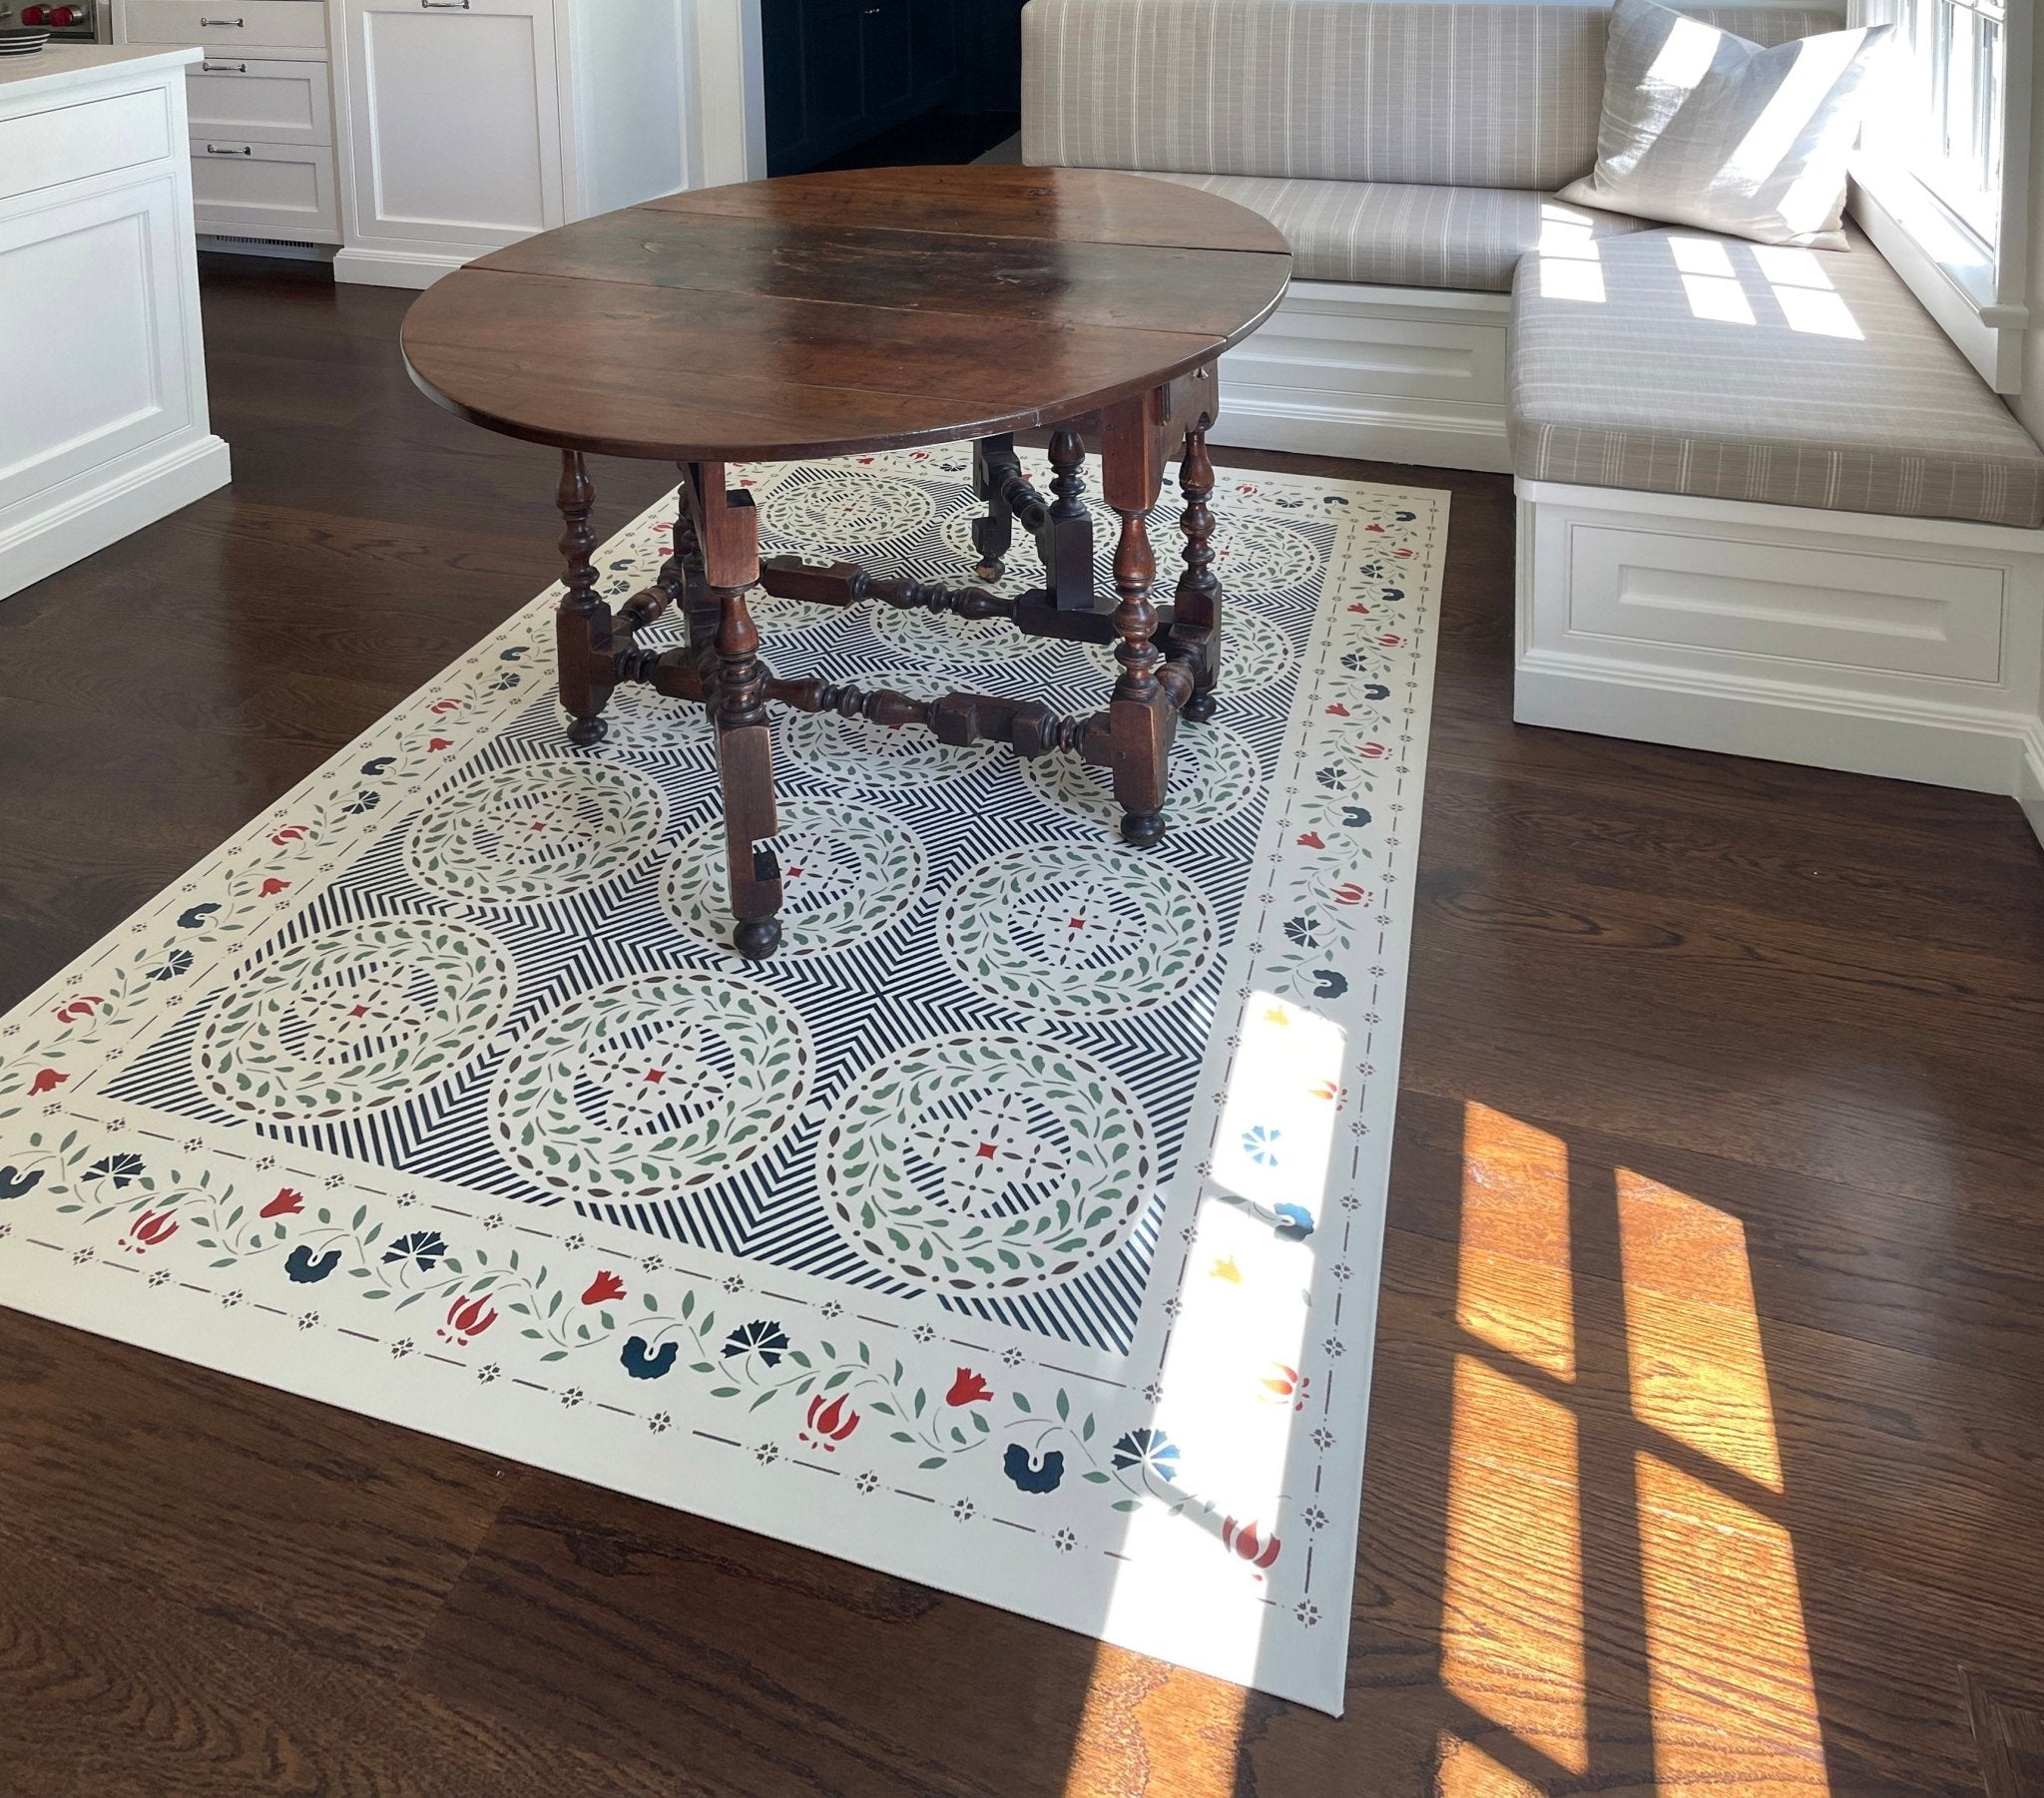 An in-situ image of Edward Durant Floorcloth #2 in its home in Connecticut.